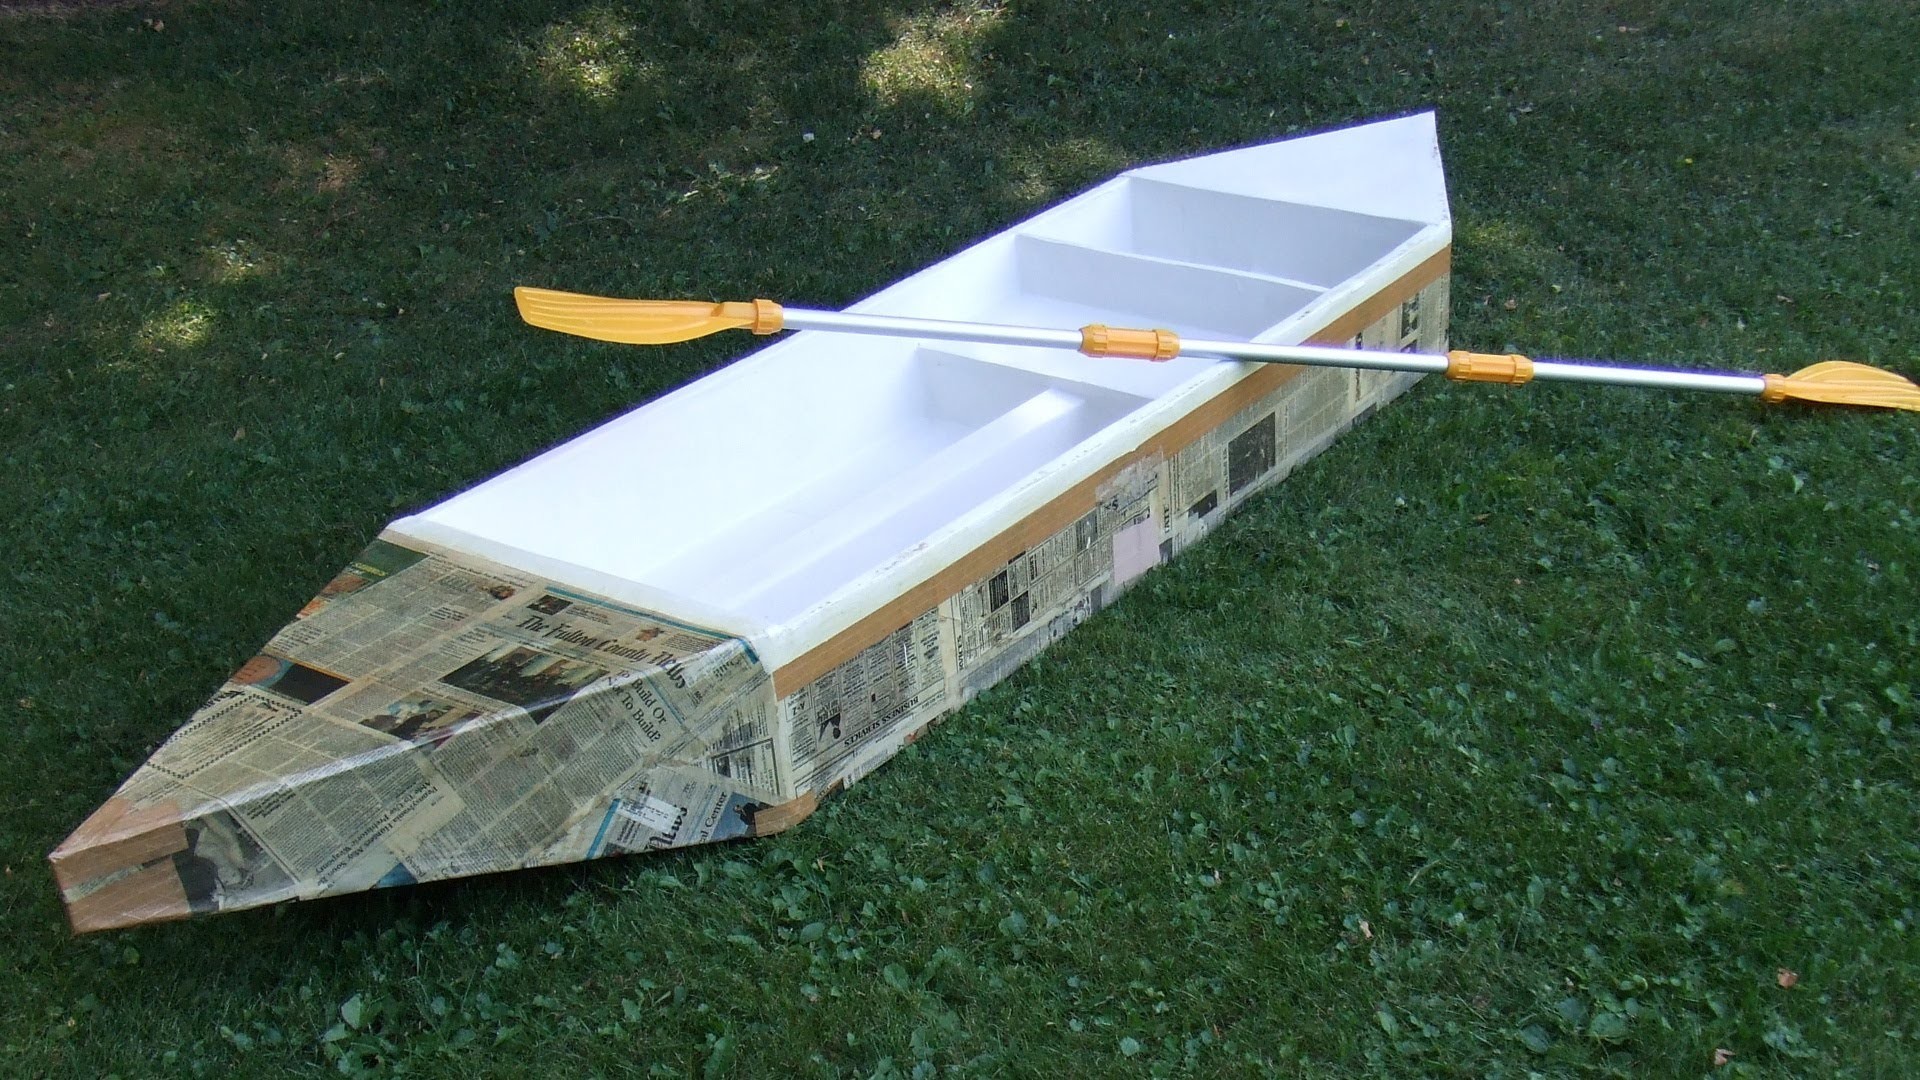 How to build a durable cardboard boat